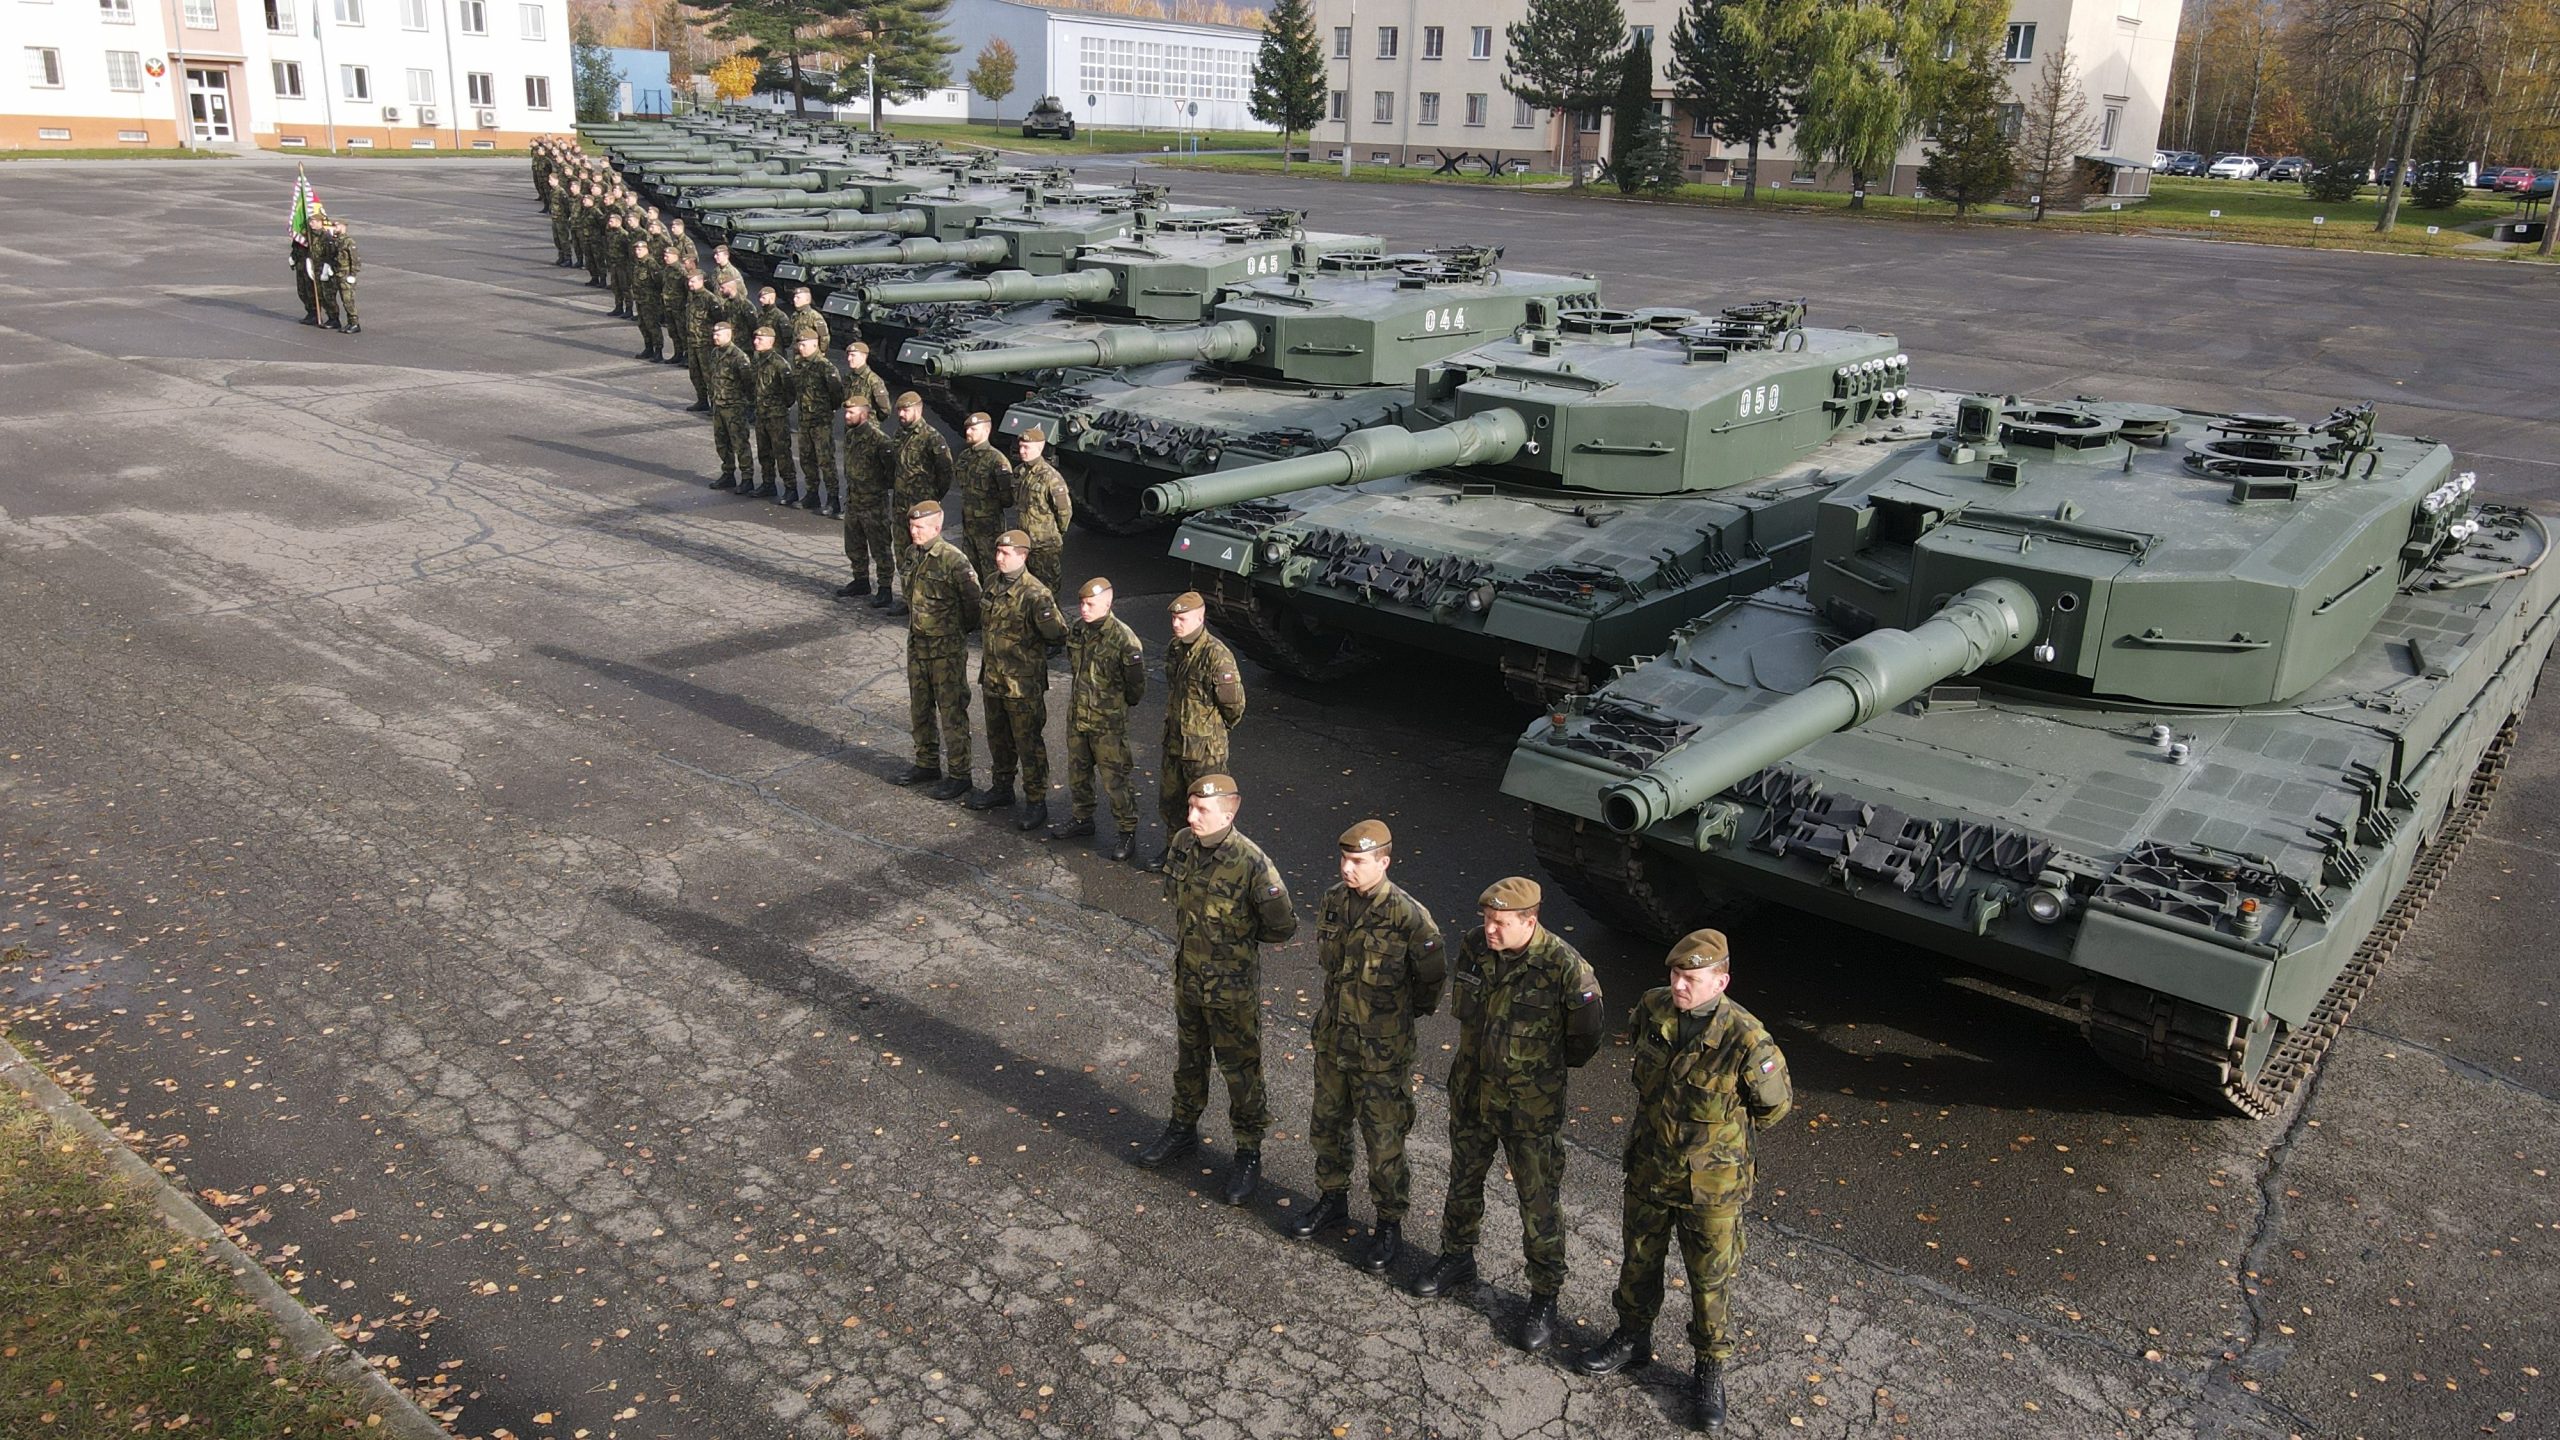 Czech Republic receives 14 Leopard 2A4 tanks from Germany - Militarnyi